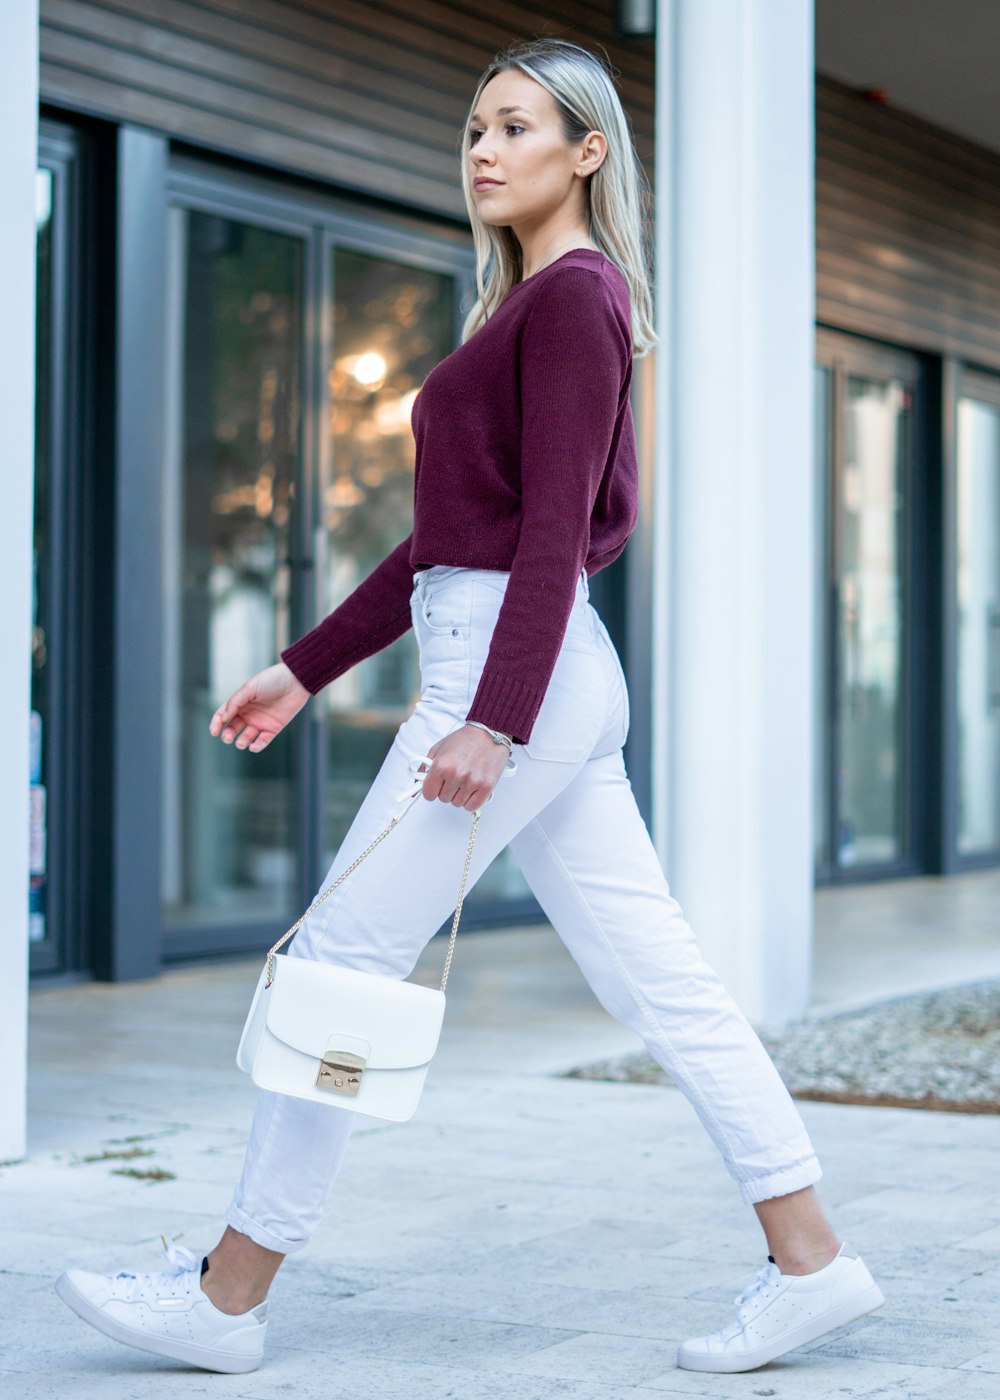 woman in red sweater and white pants walking on sidewalk during daytime